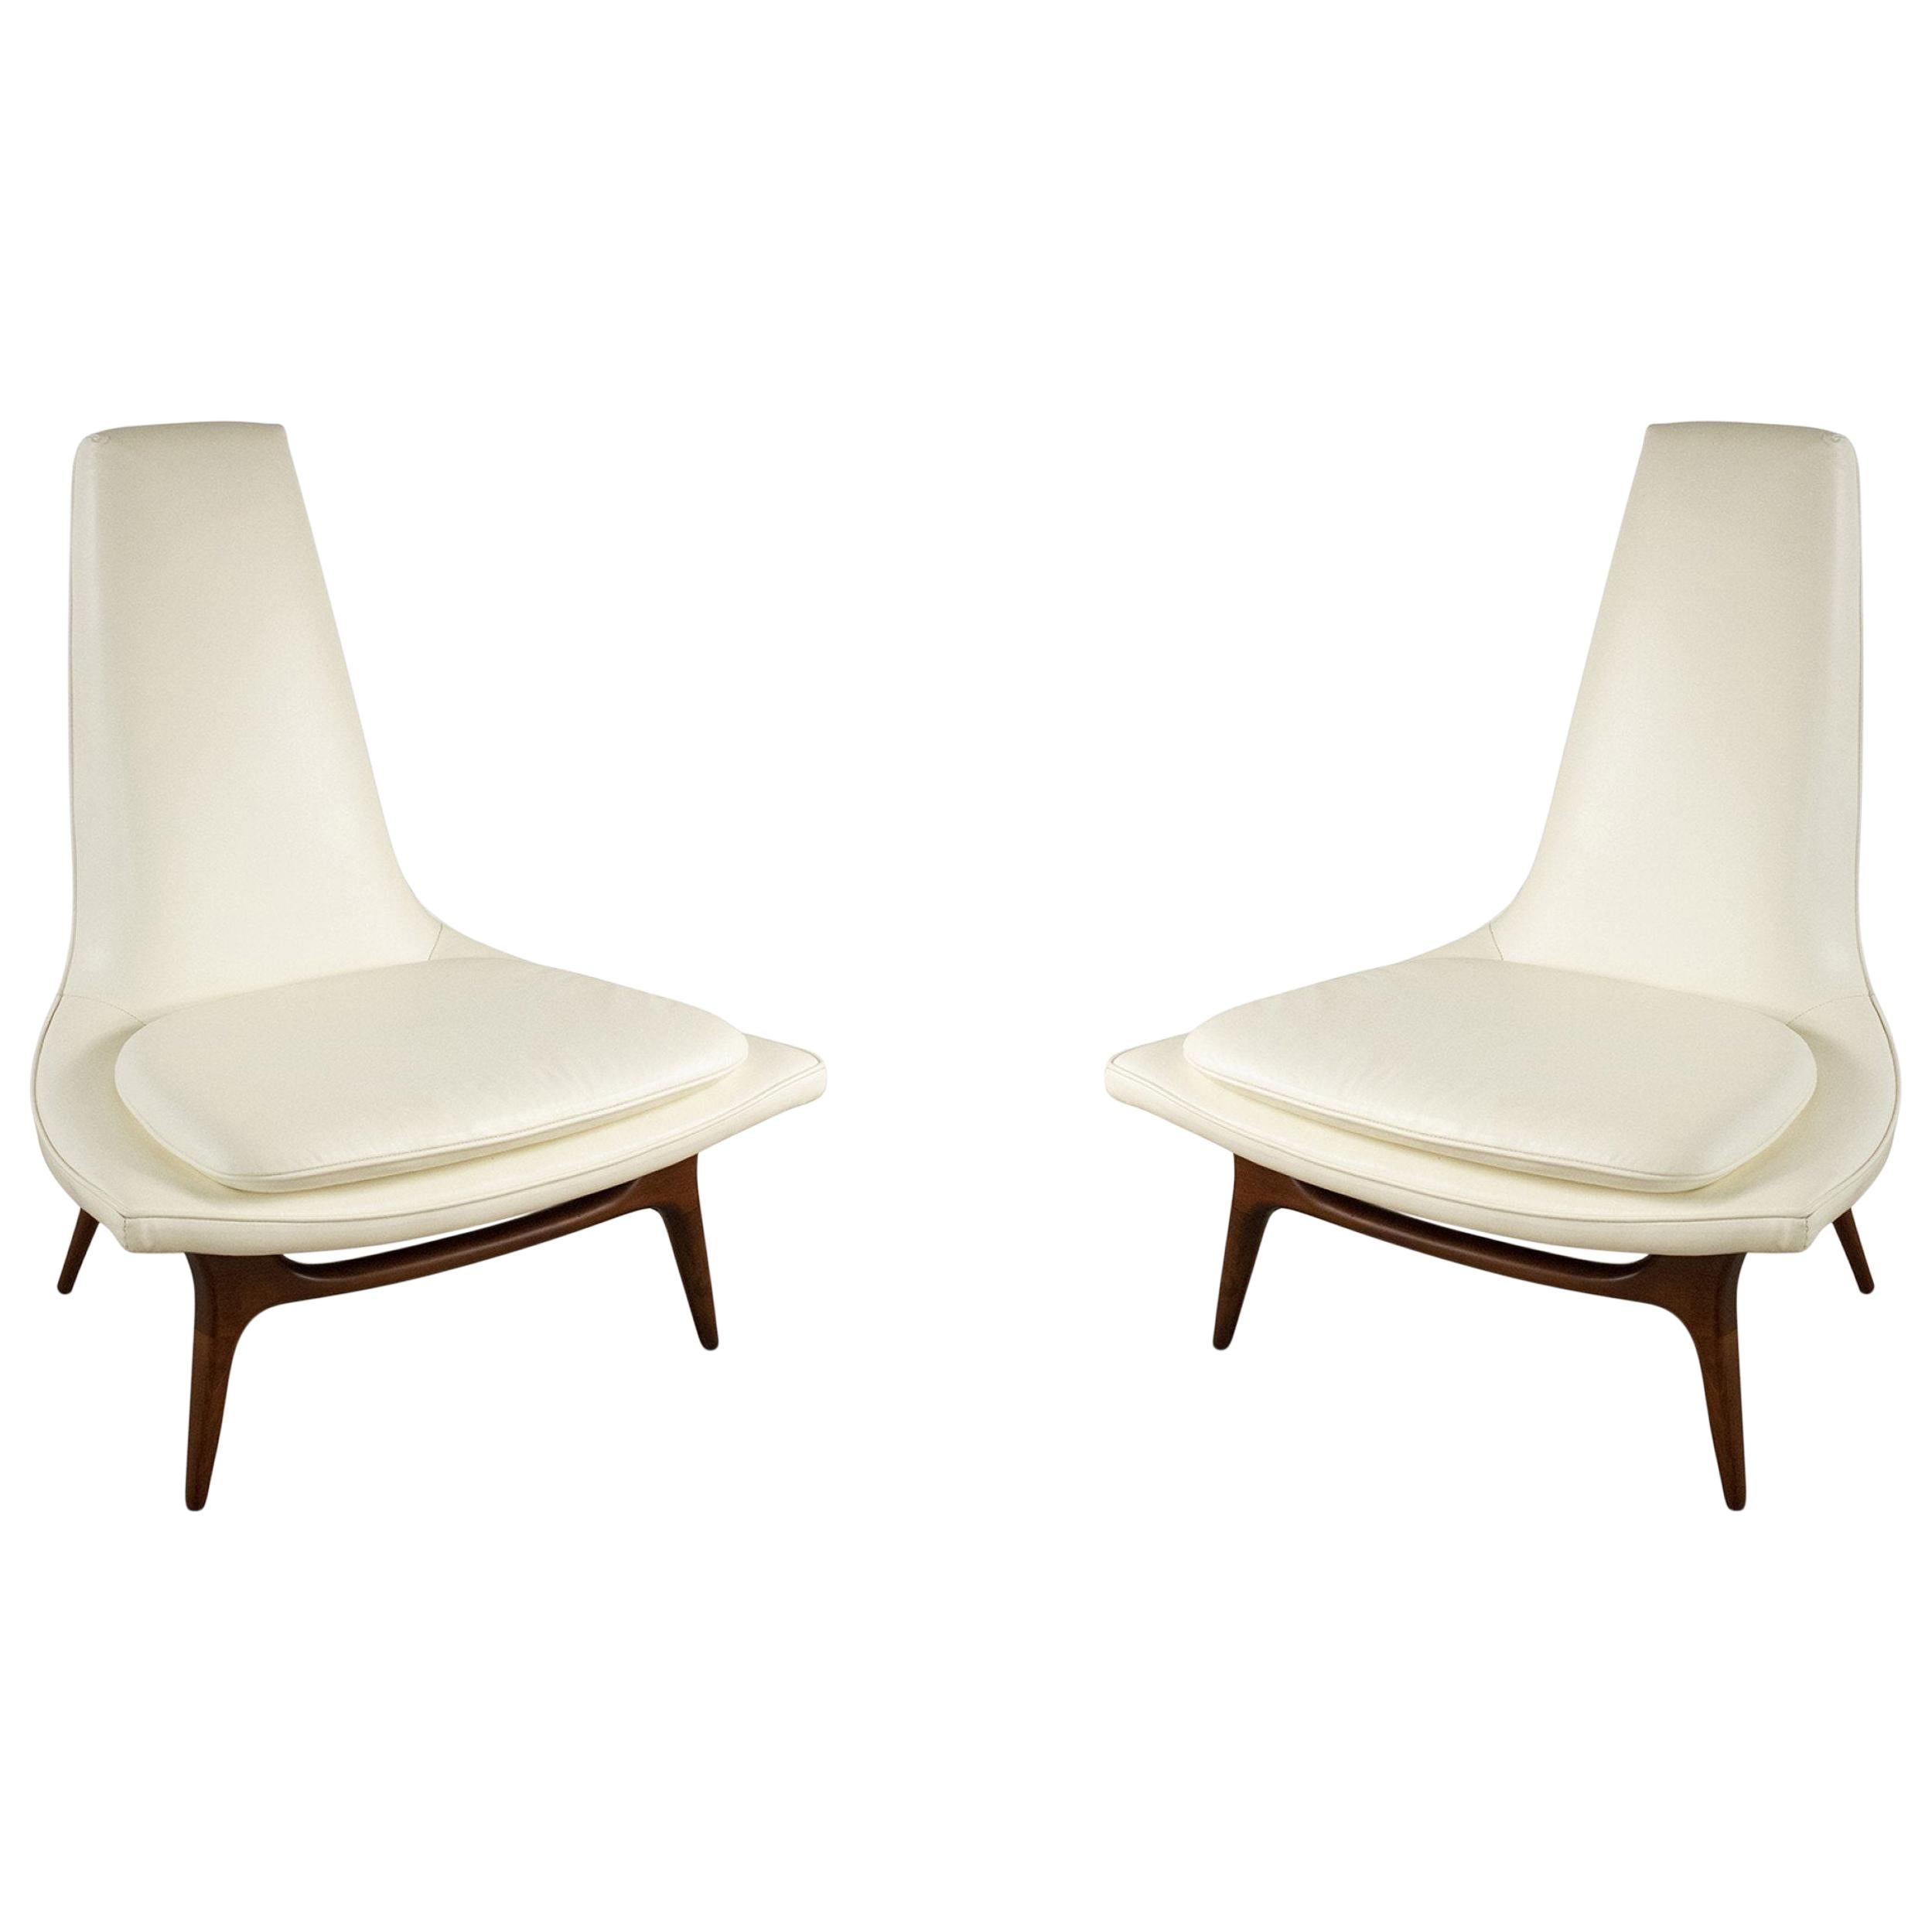 Pair of Midcentury Karpen Walnut Lounge Chairs with White Vinyl For Sale